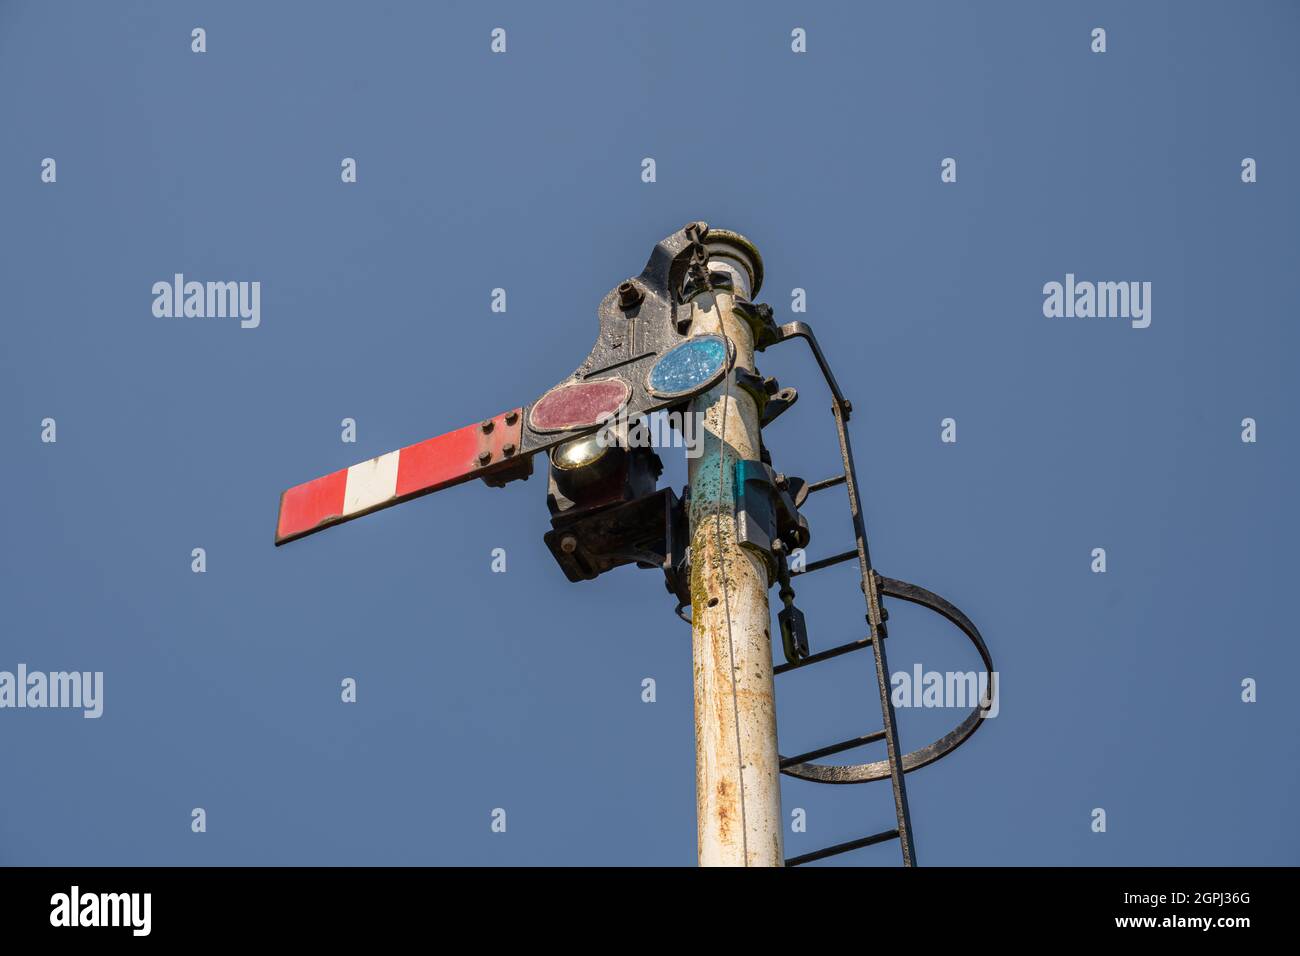 Railway semaphore signals at Rothley Station on The Great Central Railway (GCR) heritage line Stock Photo